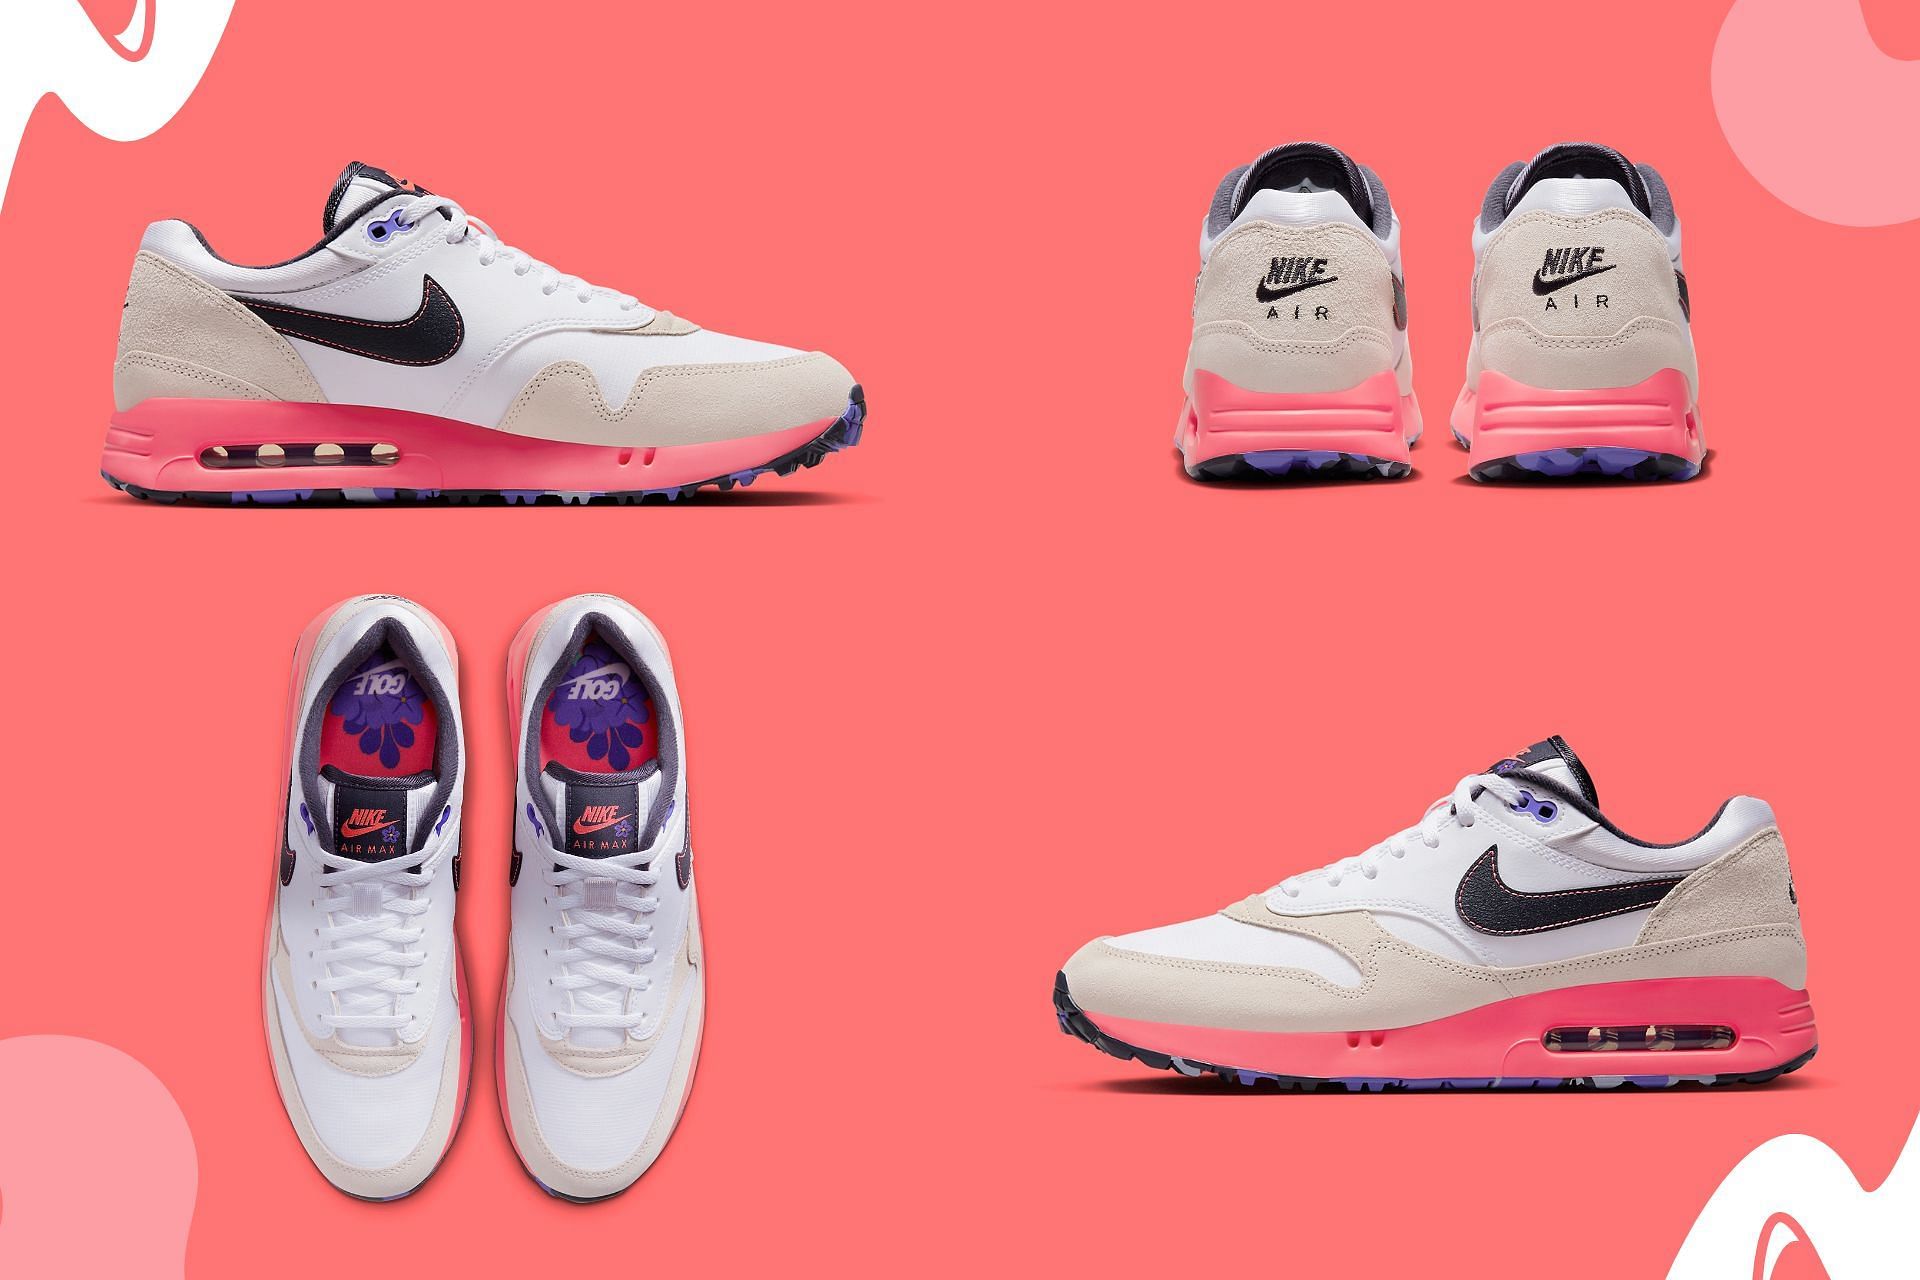 The upcoming Nike Air Max 1 Golf &quot;Periwinkle&quot; sneakers will be released in celebration of the PGA Championship (Image via Sportskeeda)